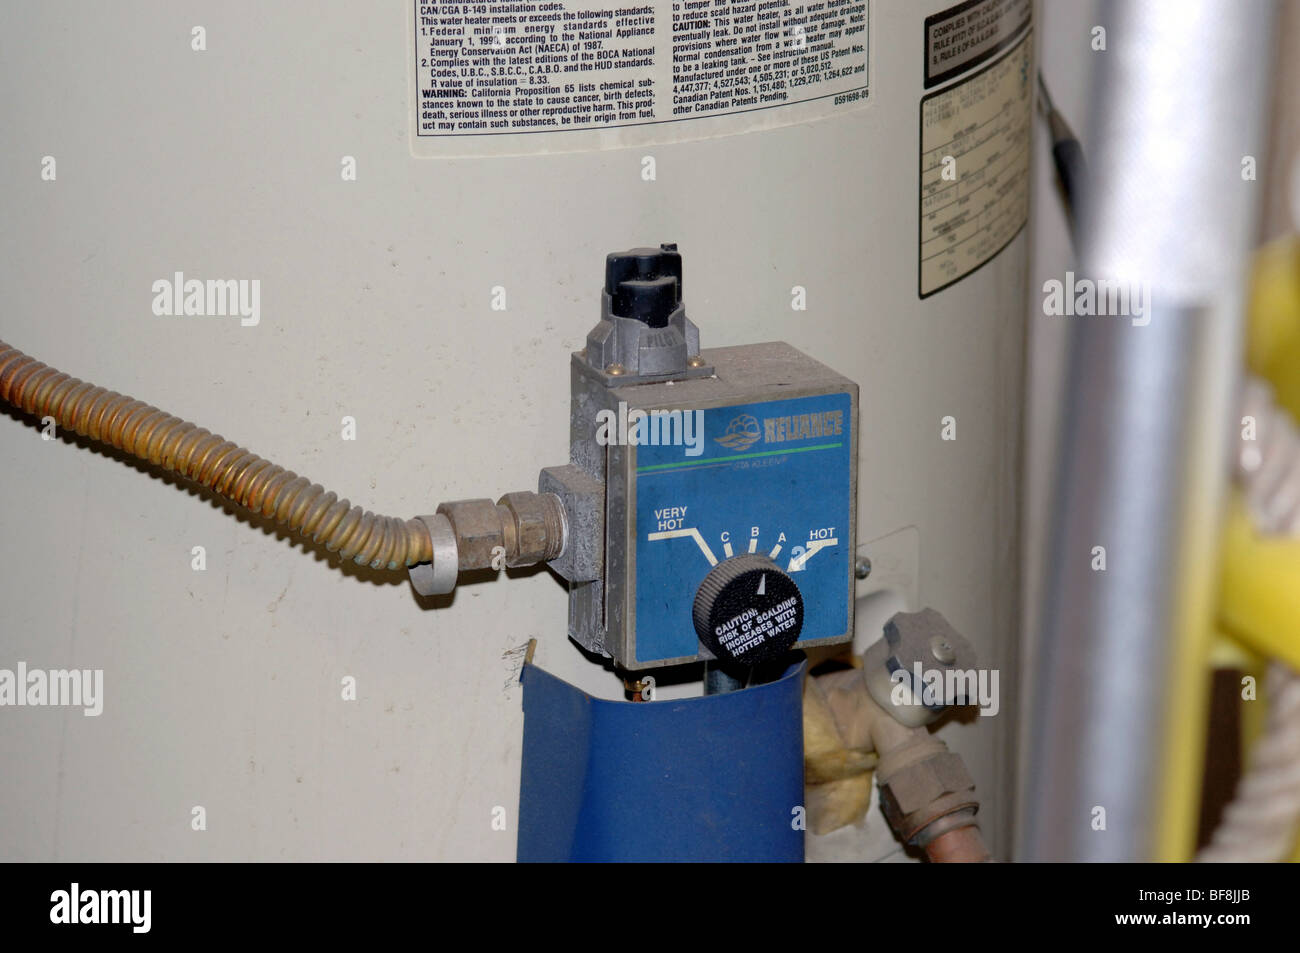 Water heater controls with flex gas line visible. Stock Photo